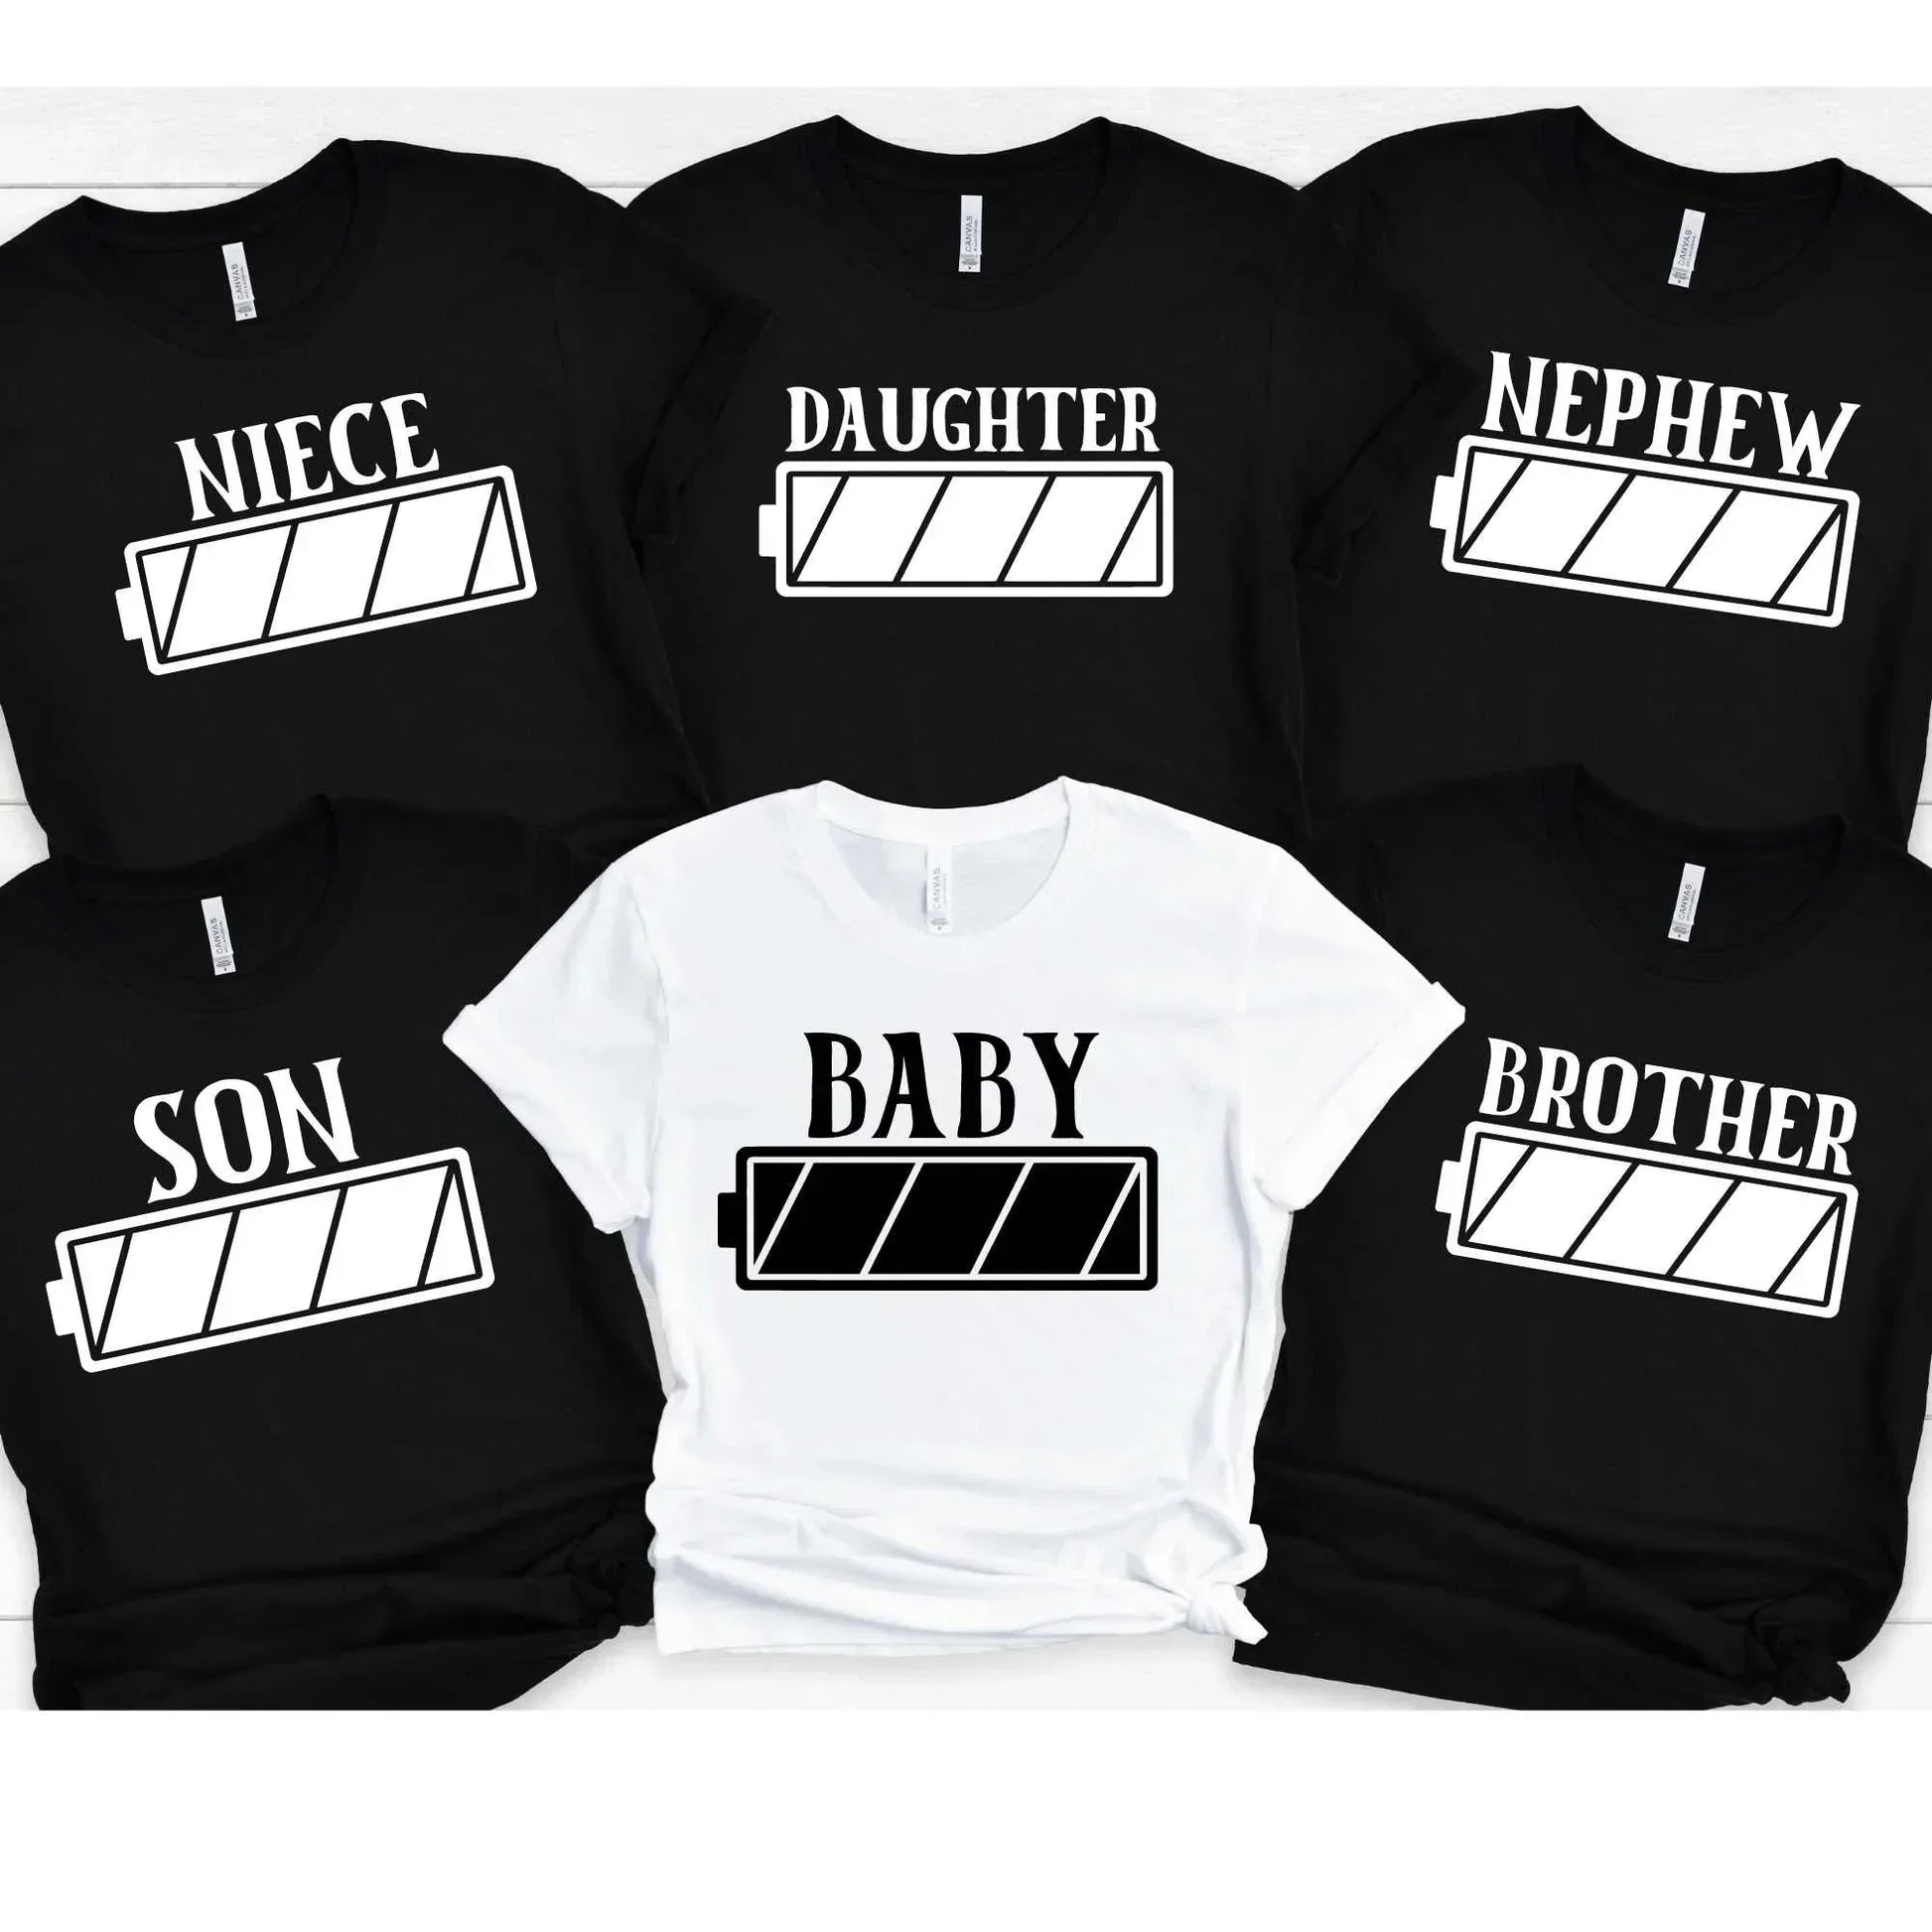 Family Matching Tees for Photos, Pregnancy Reveal Shirts, Baby Announcement Photographs, Baby Shower Gifts, 1st Time Parents & Grandparents